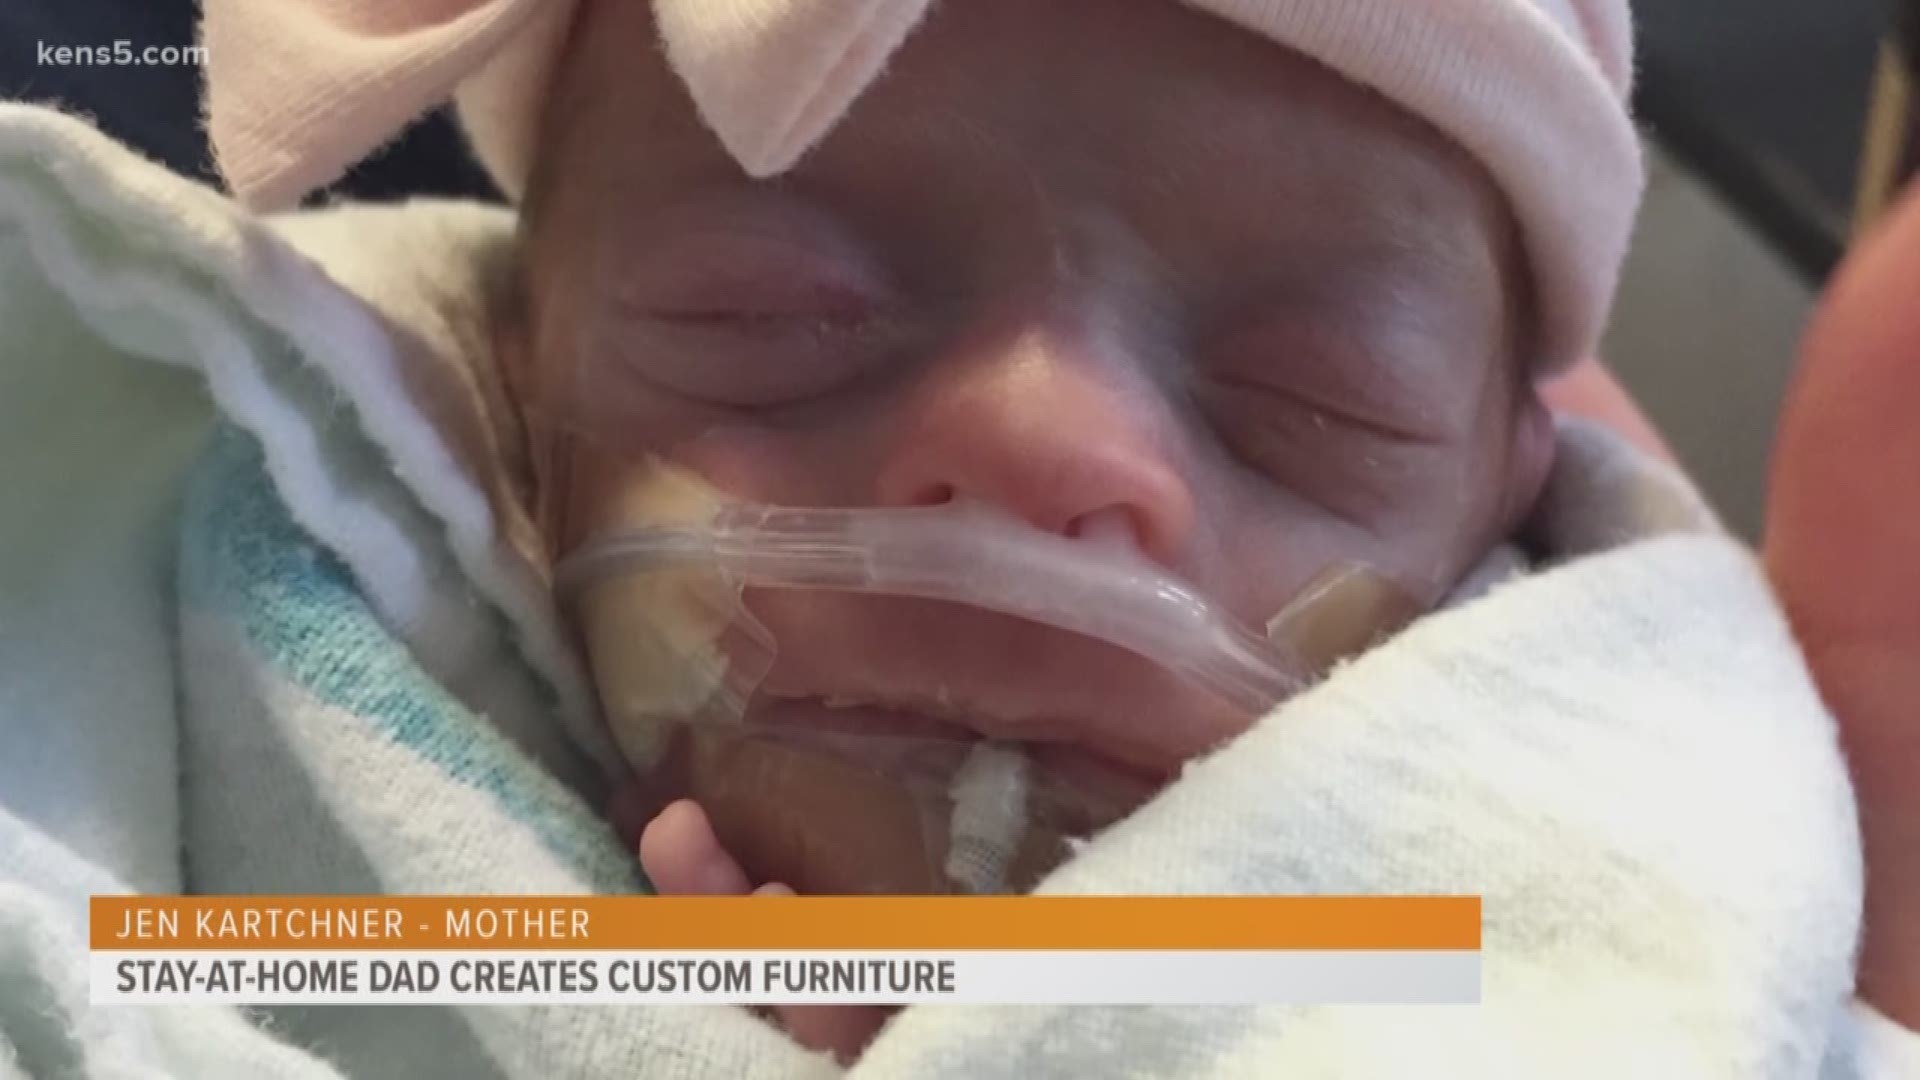 A San Antonio man found his passion for rustic furniture after the premature birth of his baby girl.